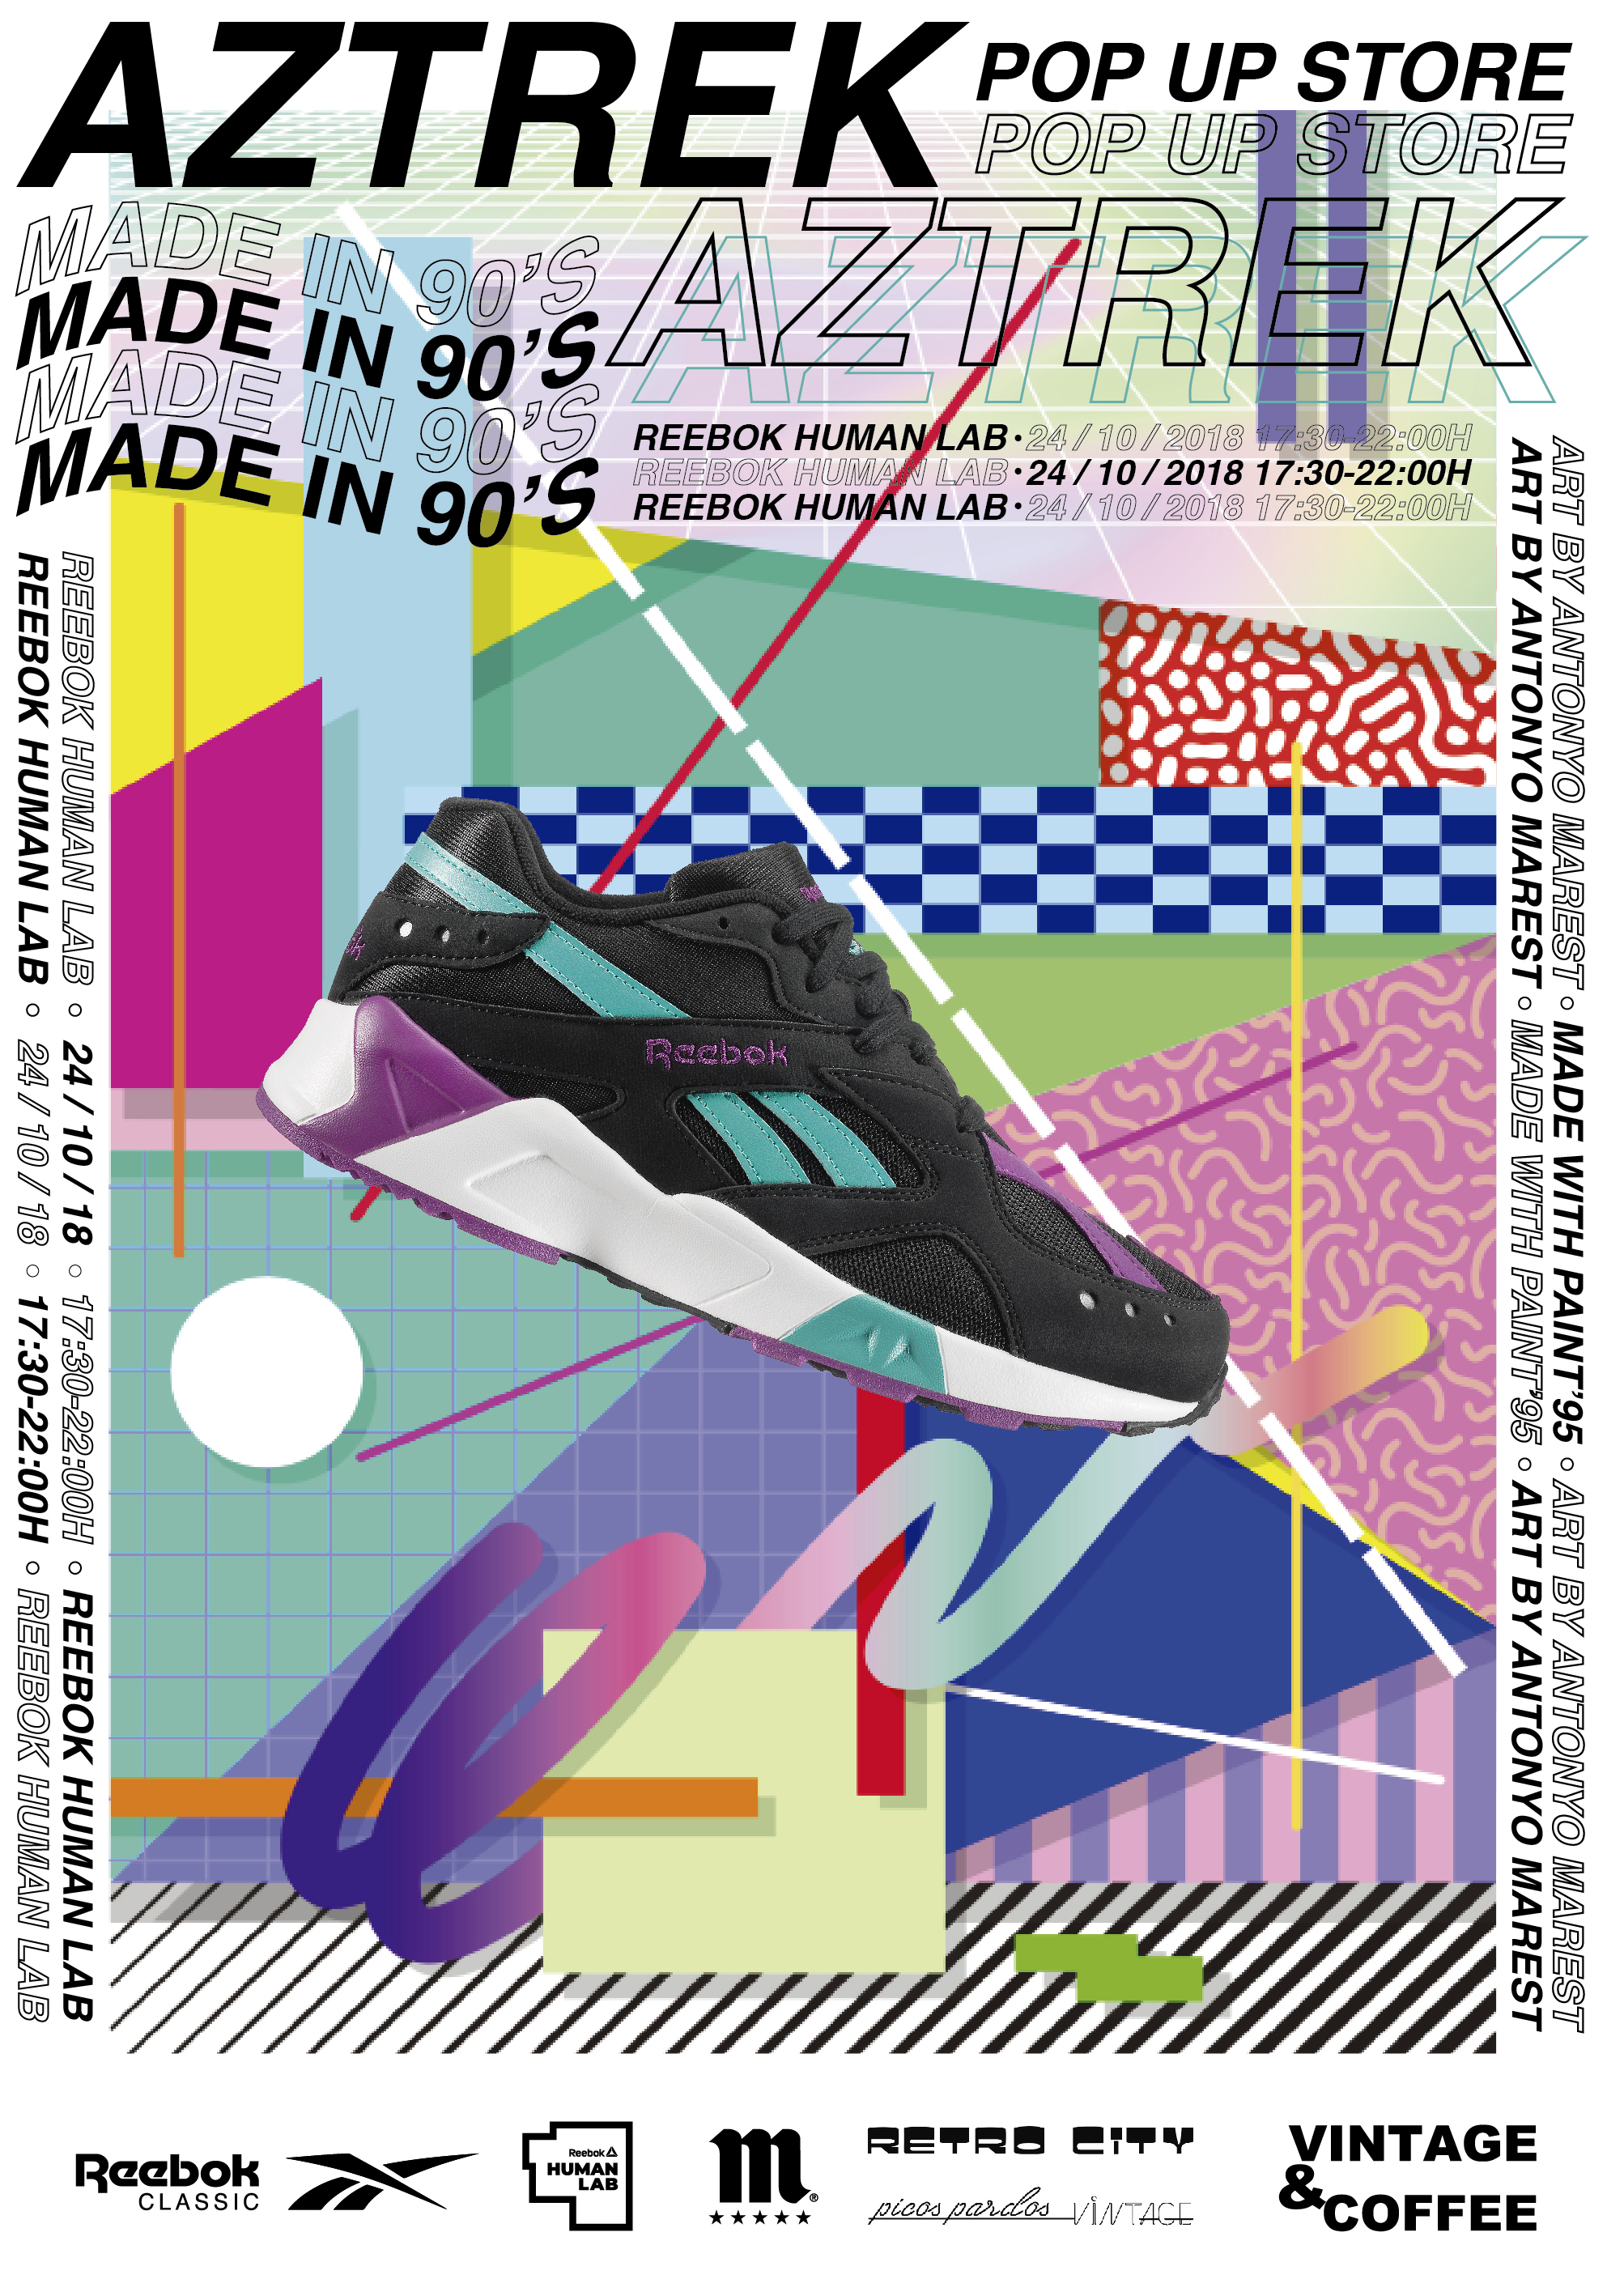 Reebok / Made in - Prints - xemacabanes